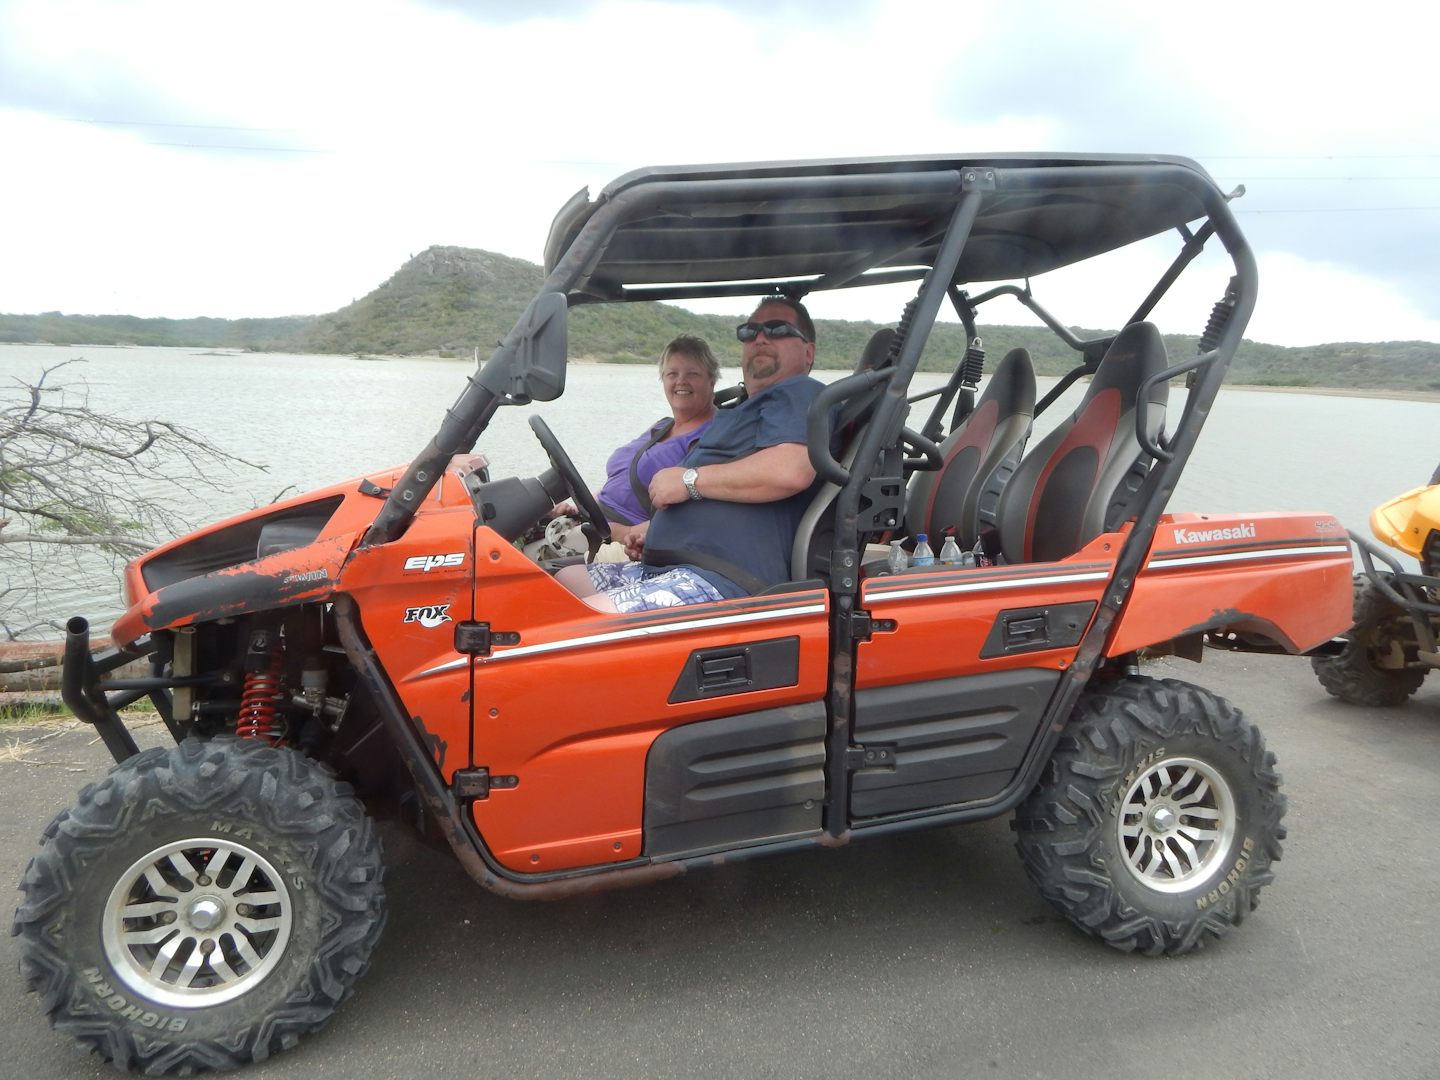 Buggy tour in Curacao.  SO MUCH FUN!!!  6 hours, 57 miles.  We had a blast!